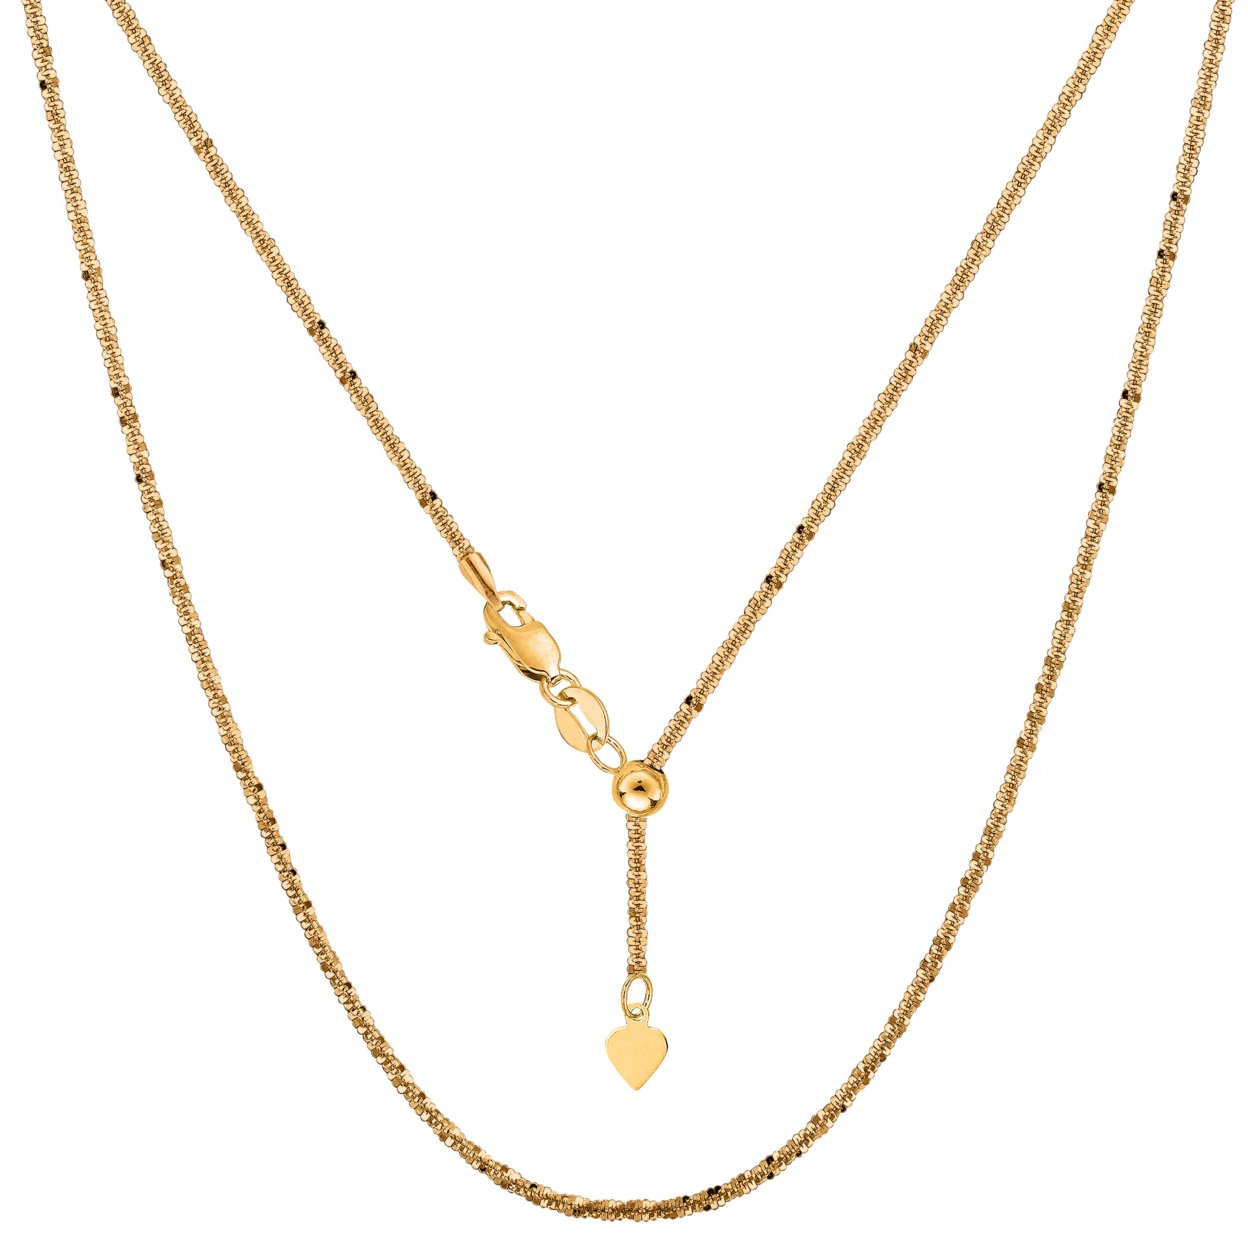 JewelryAffairs 10k Yellow Gold Adjustable Sparkle Link Chain Necklace, 1.5mm, 22"